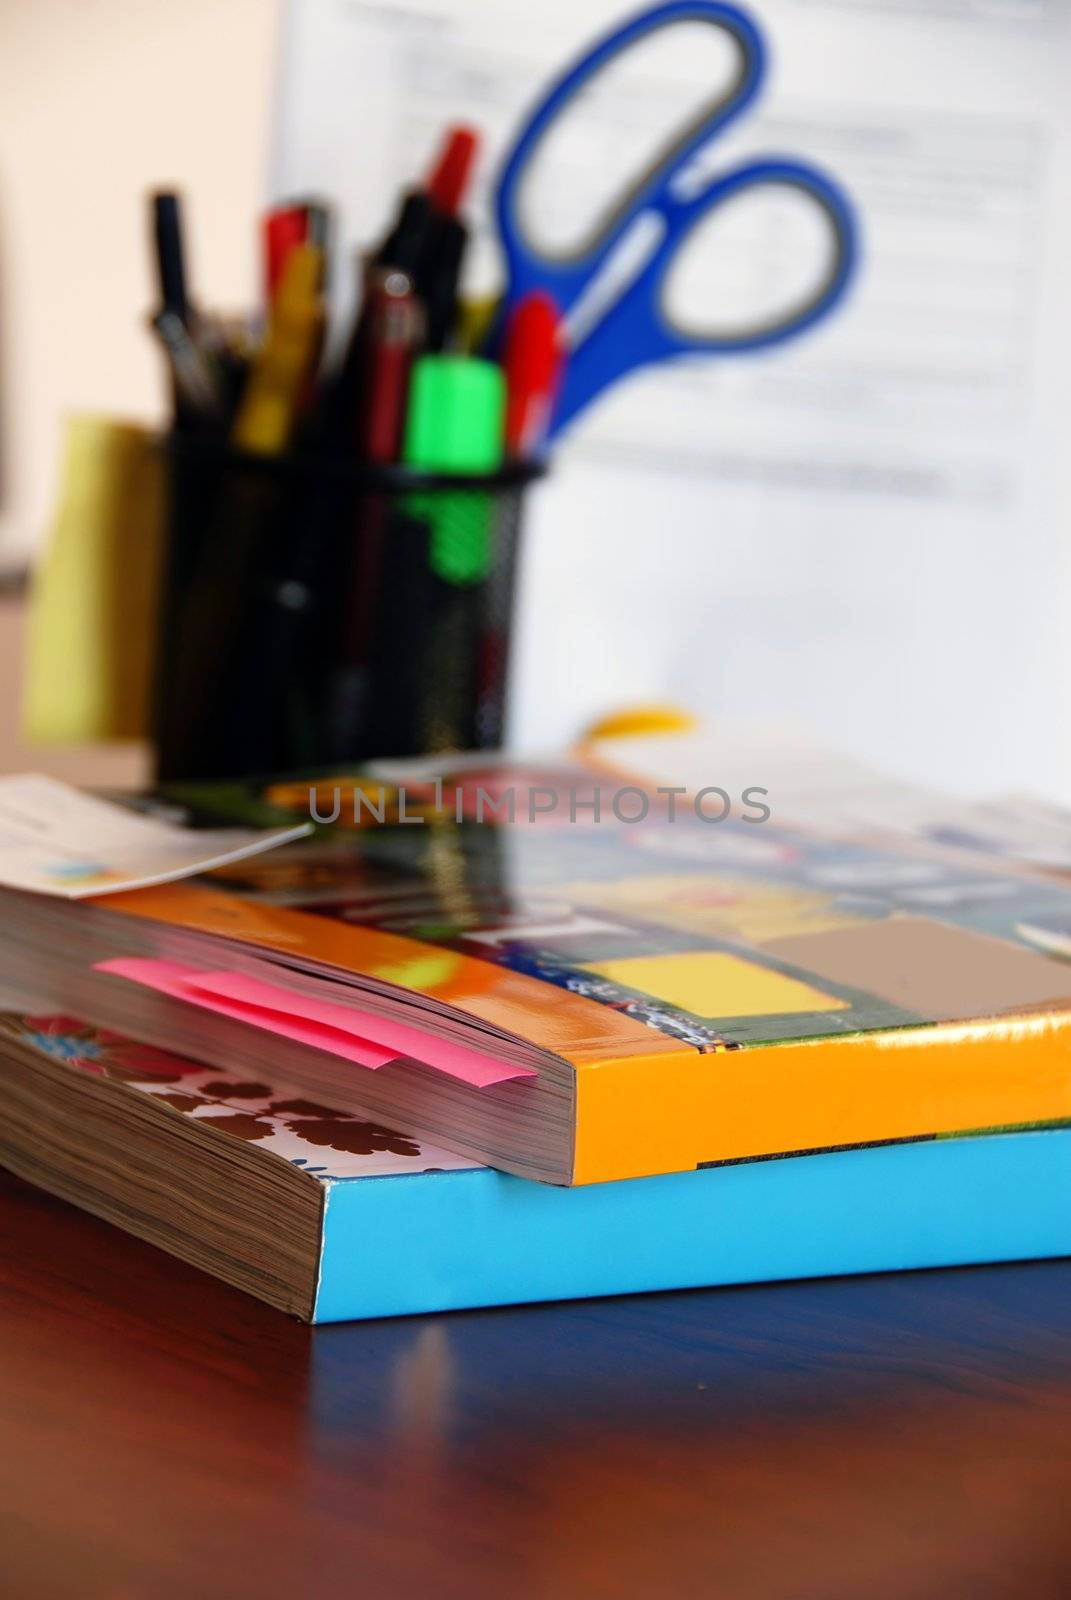 Catalogs on office desk by simply